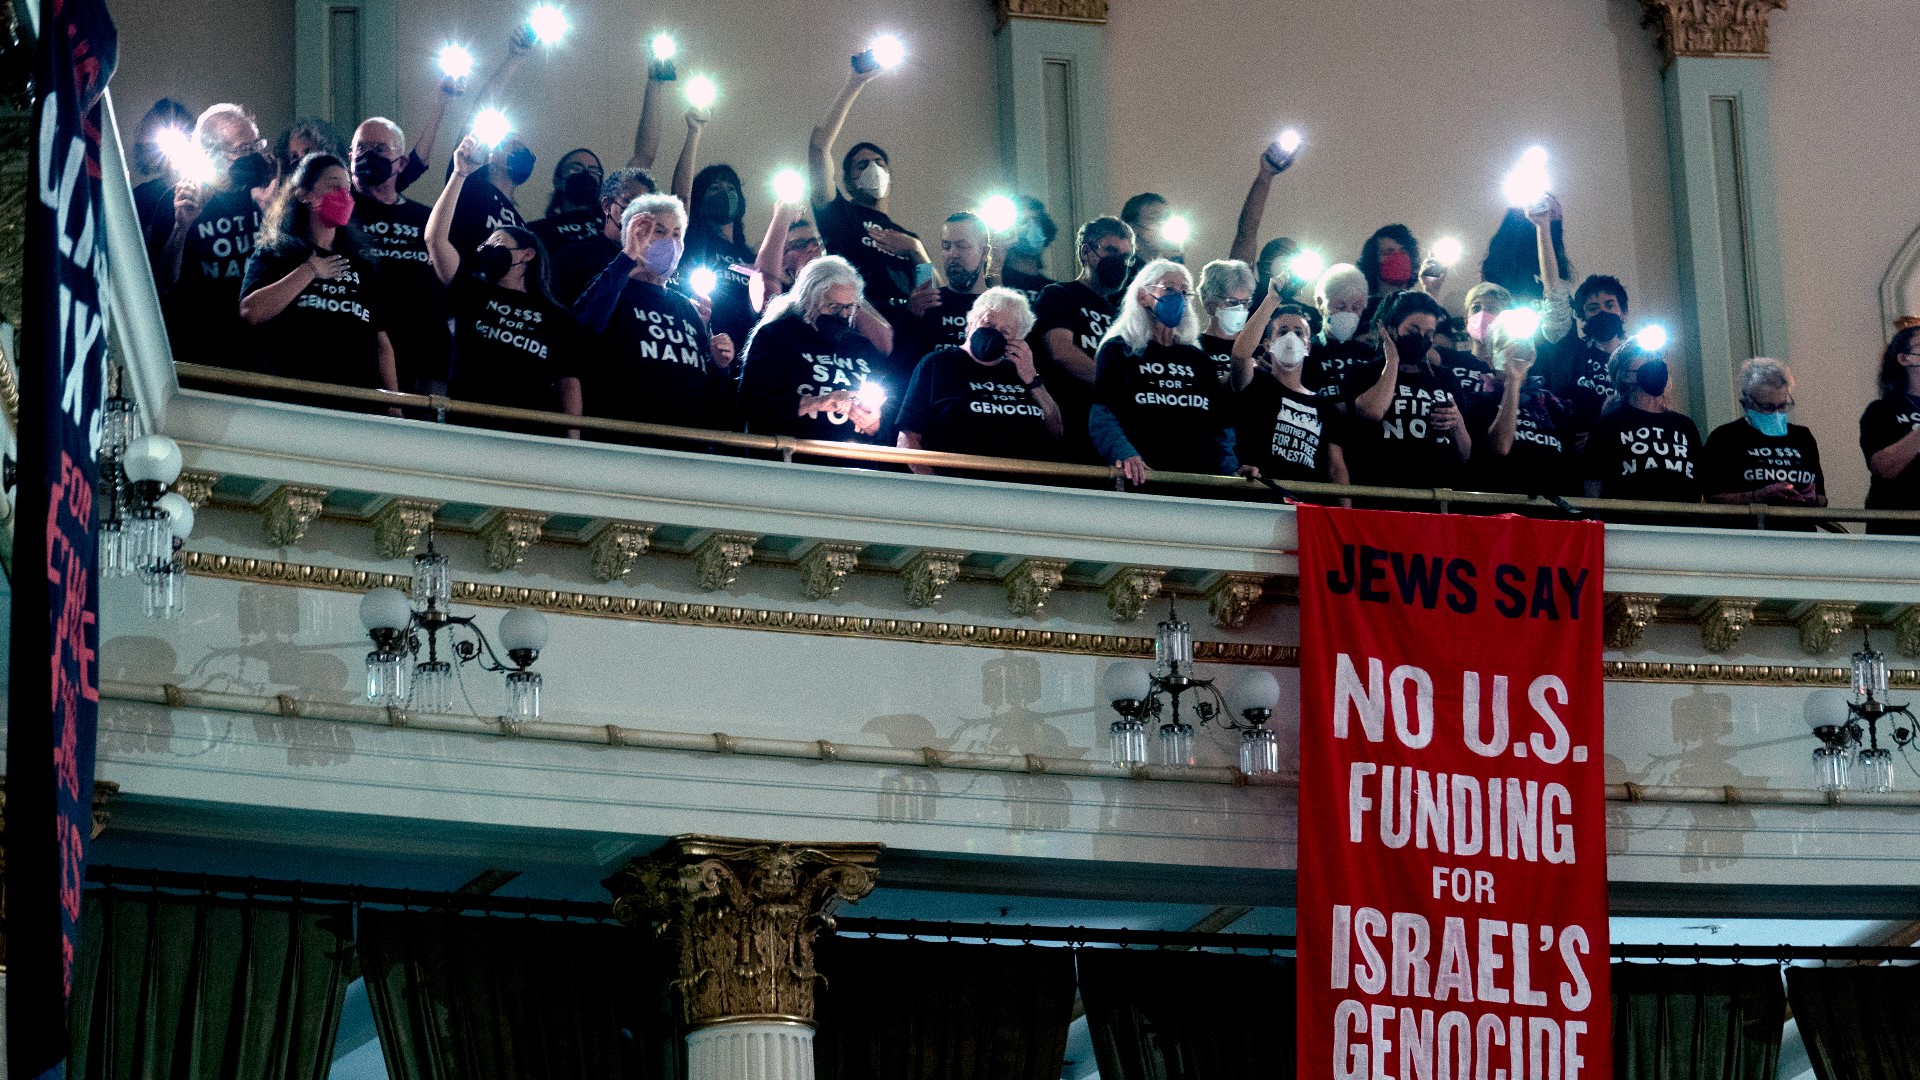 Protesters calling for a cease-fire in the Israel-Hamas war disrupted the first day of California's legislative session.